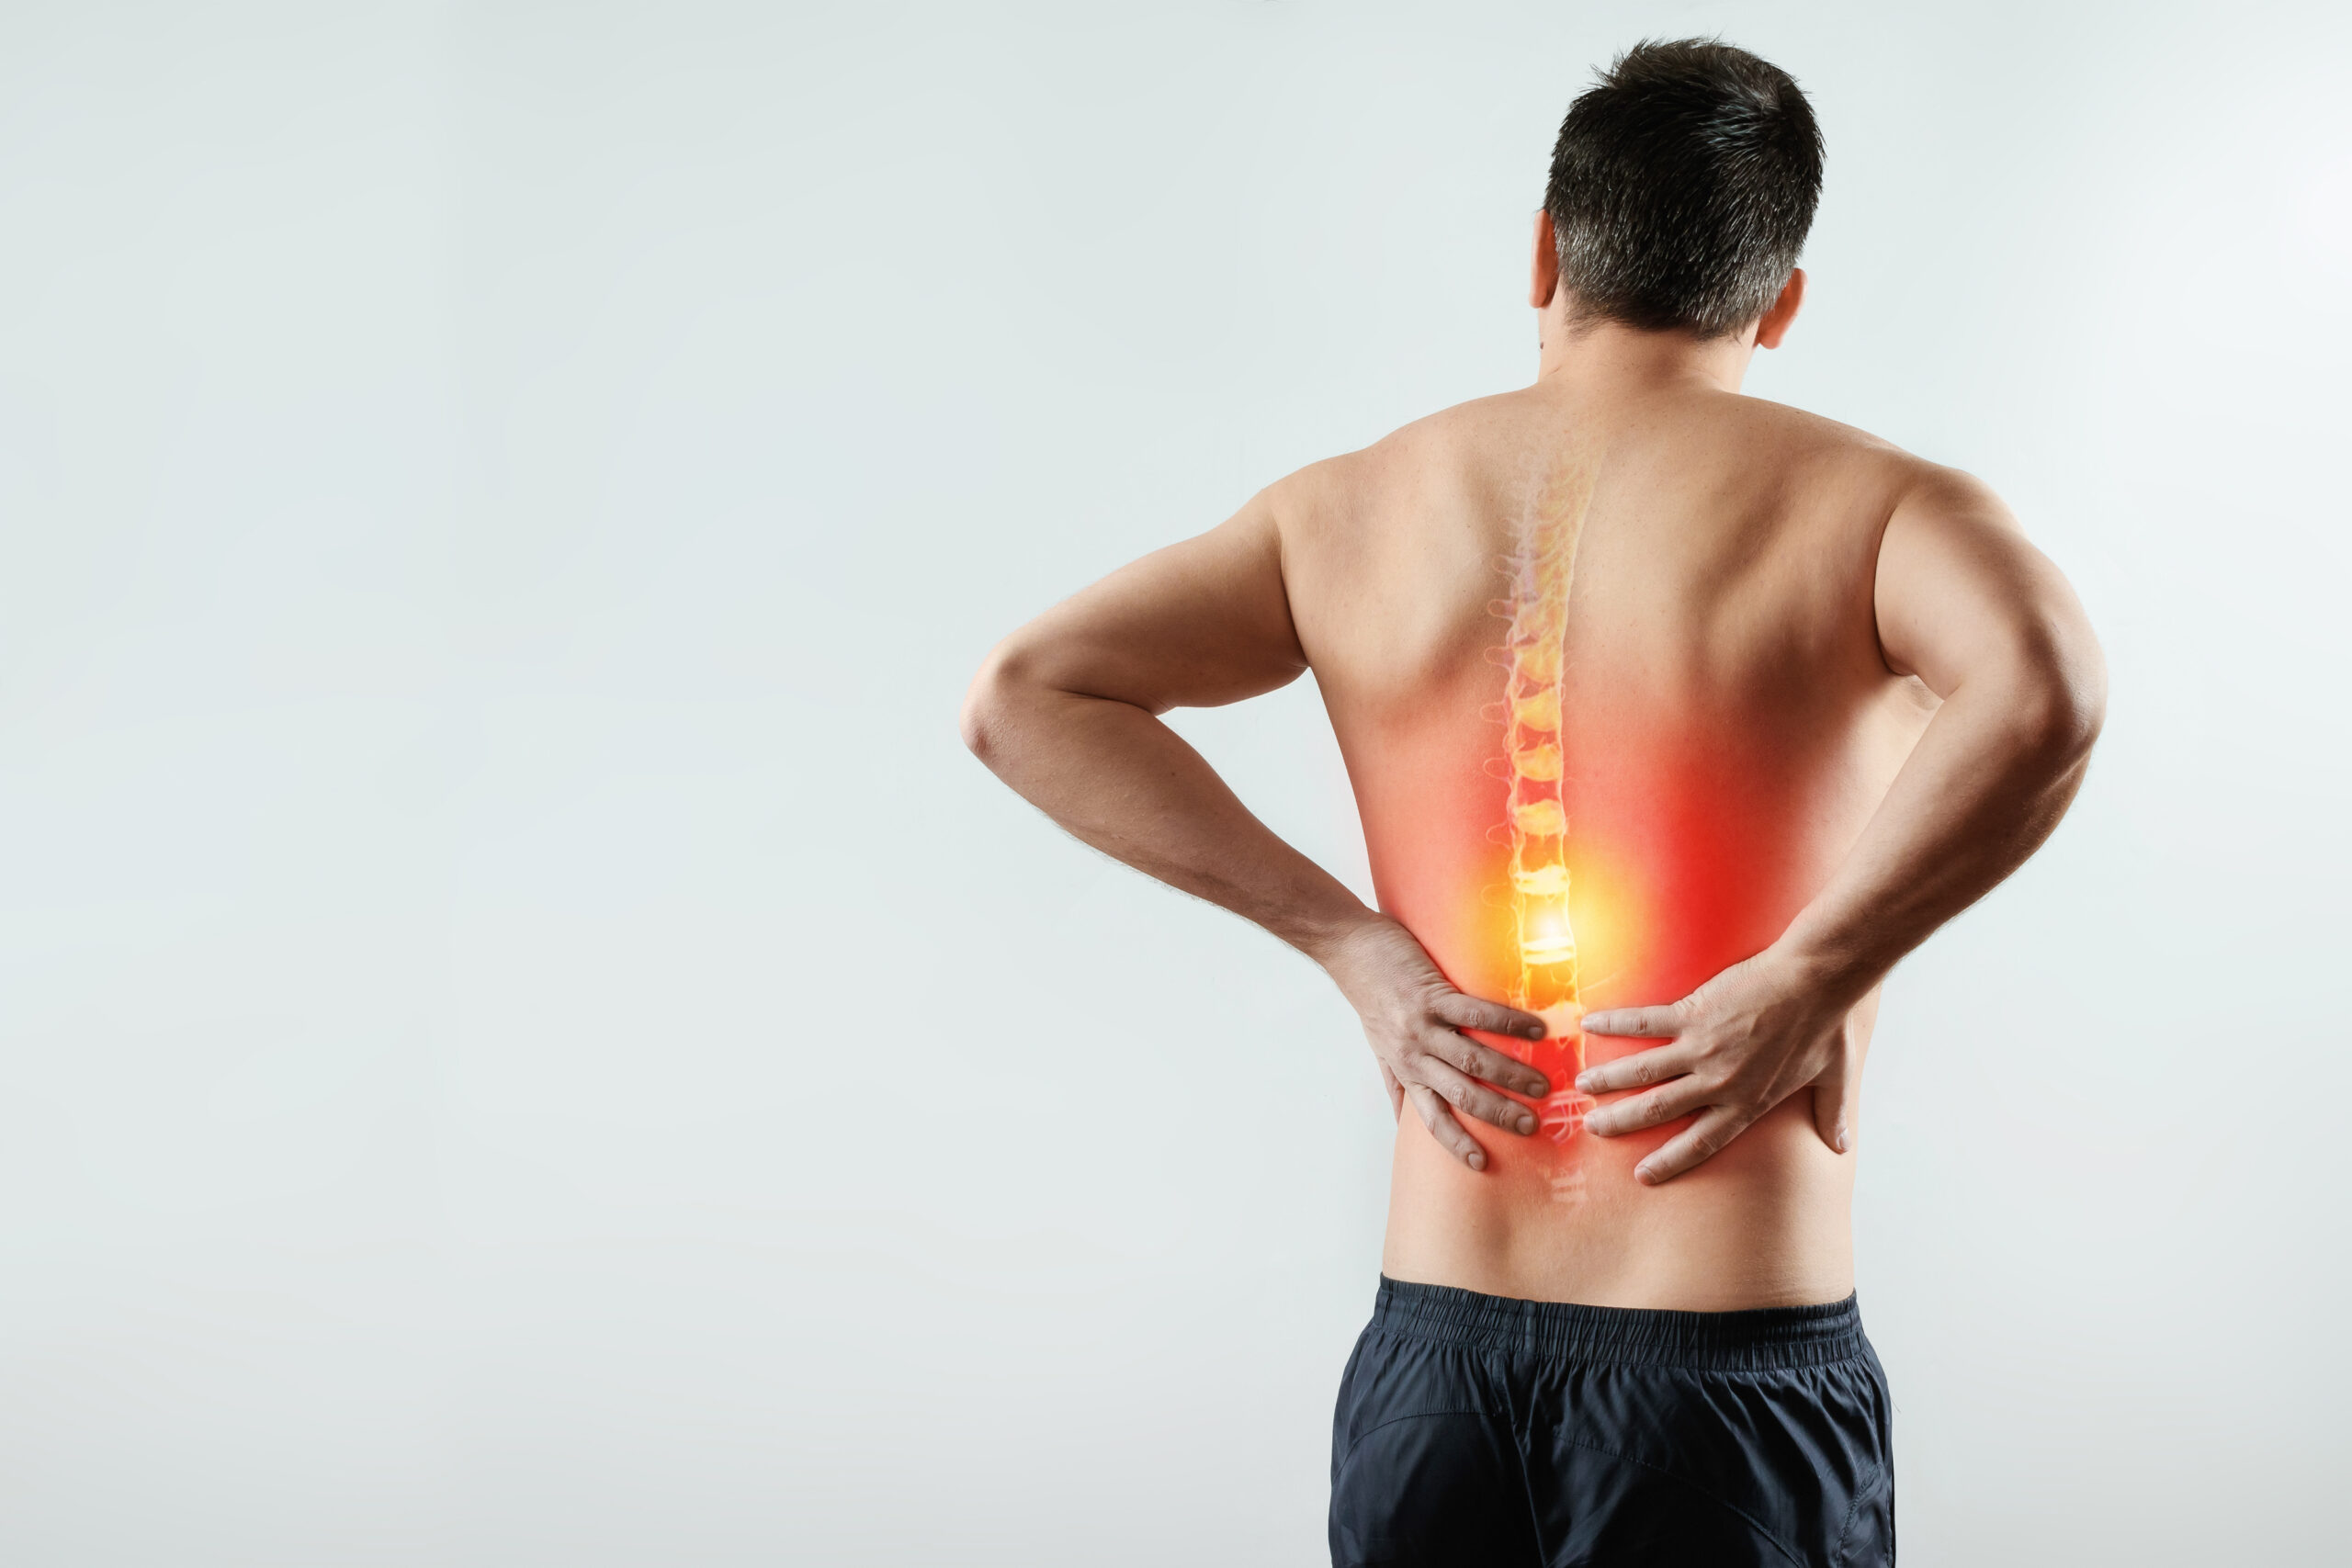 Lower back pain specialist